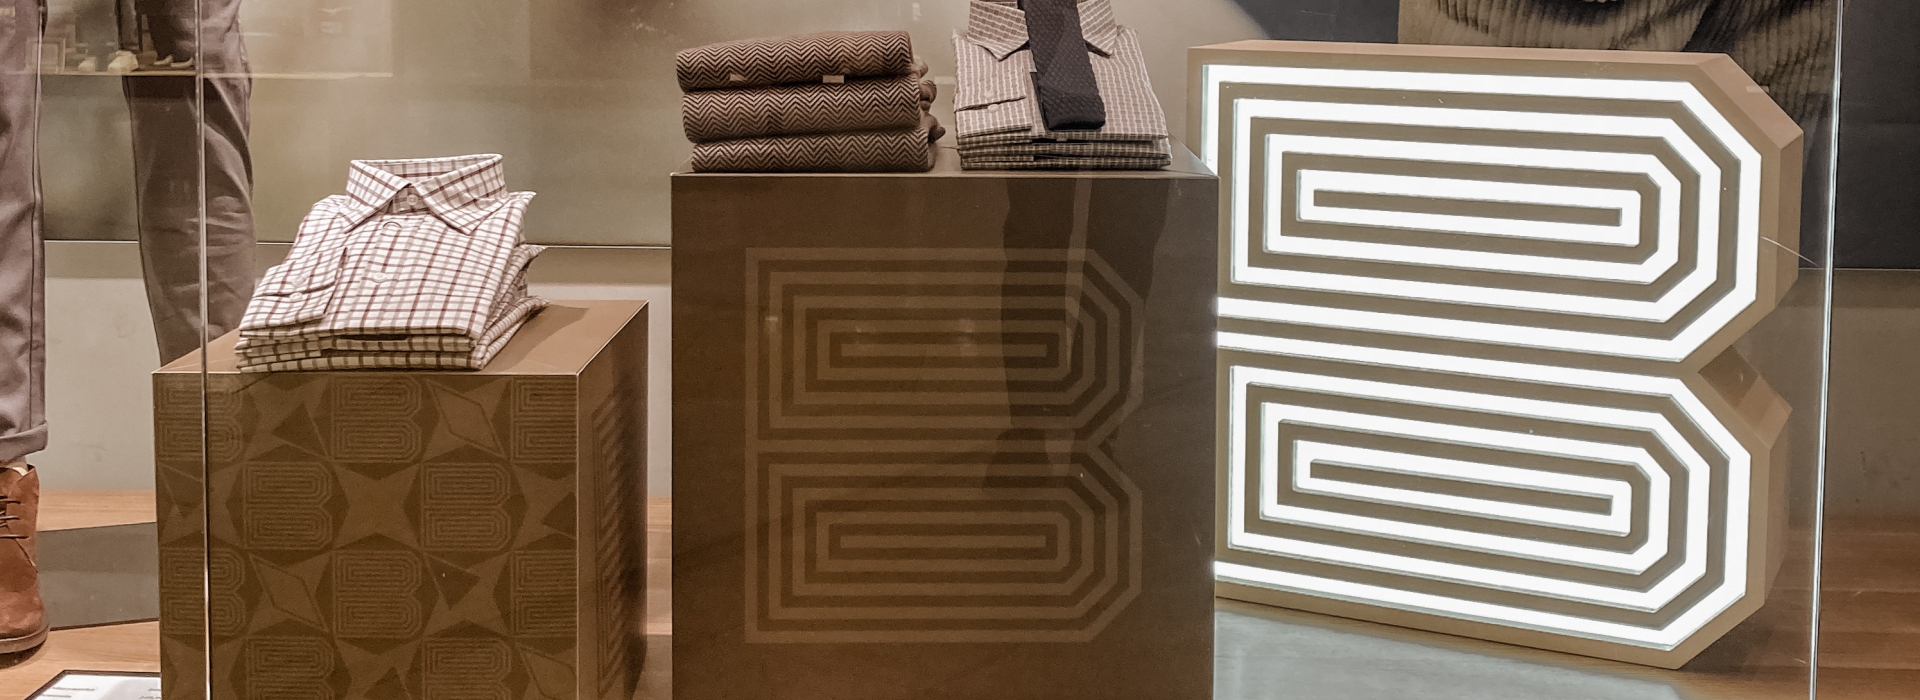 Storefront's elements at the Bytom store